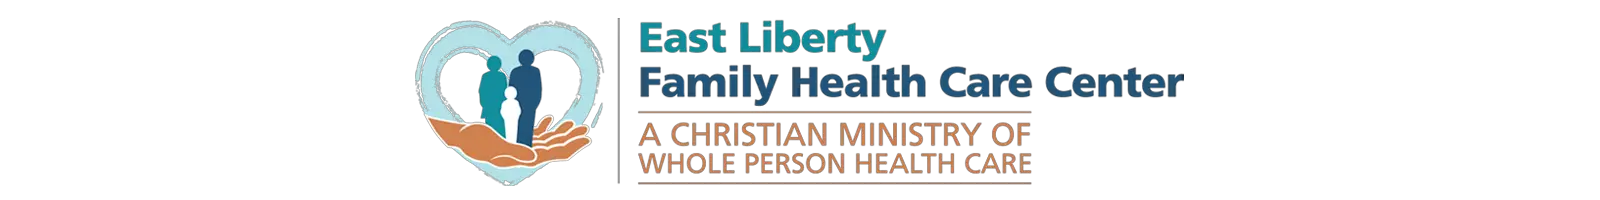 East Liberty Family Health Care Center - Lincoln-Lemington Medical and Dental Office